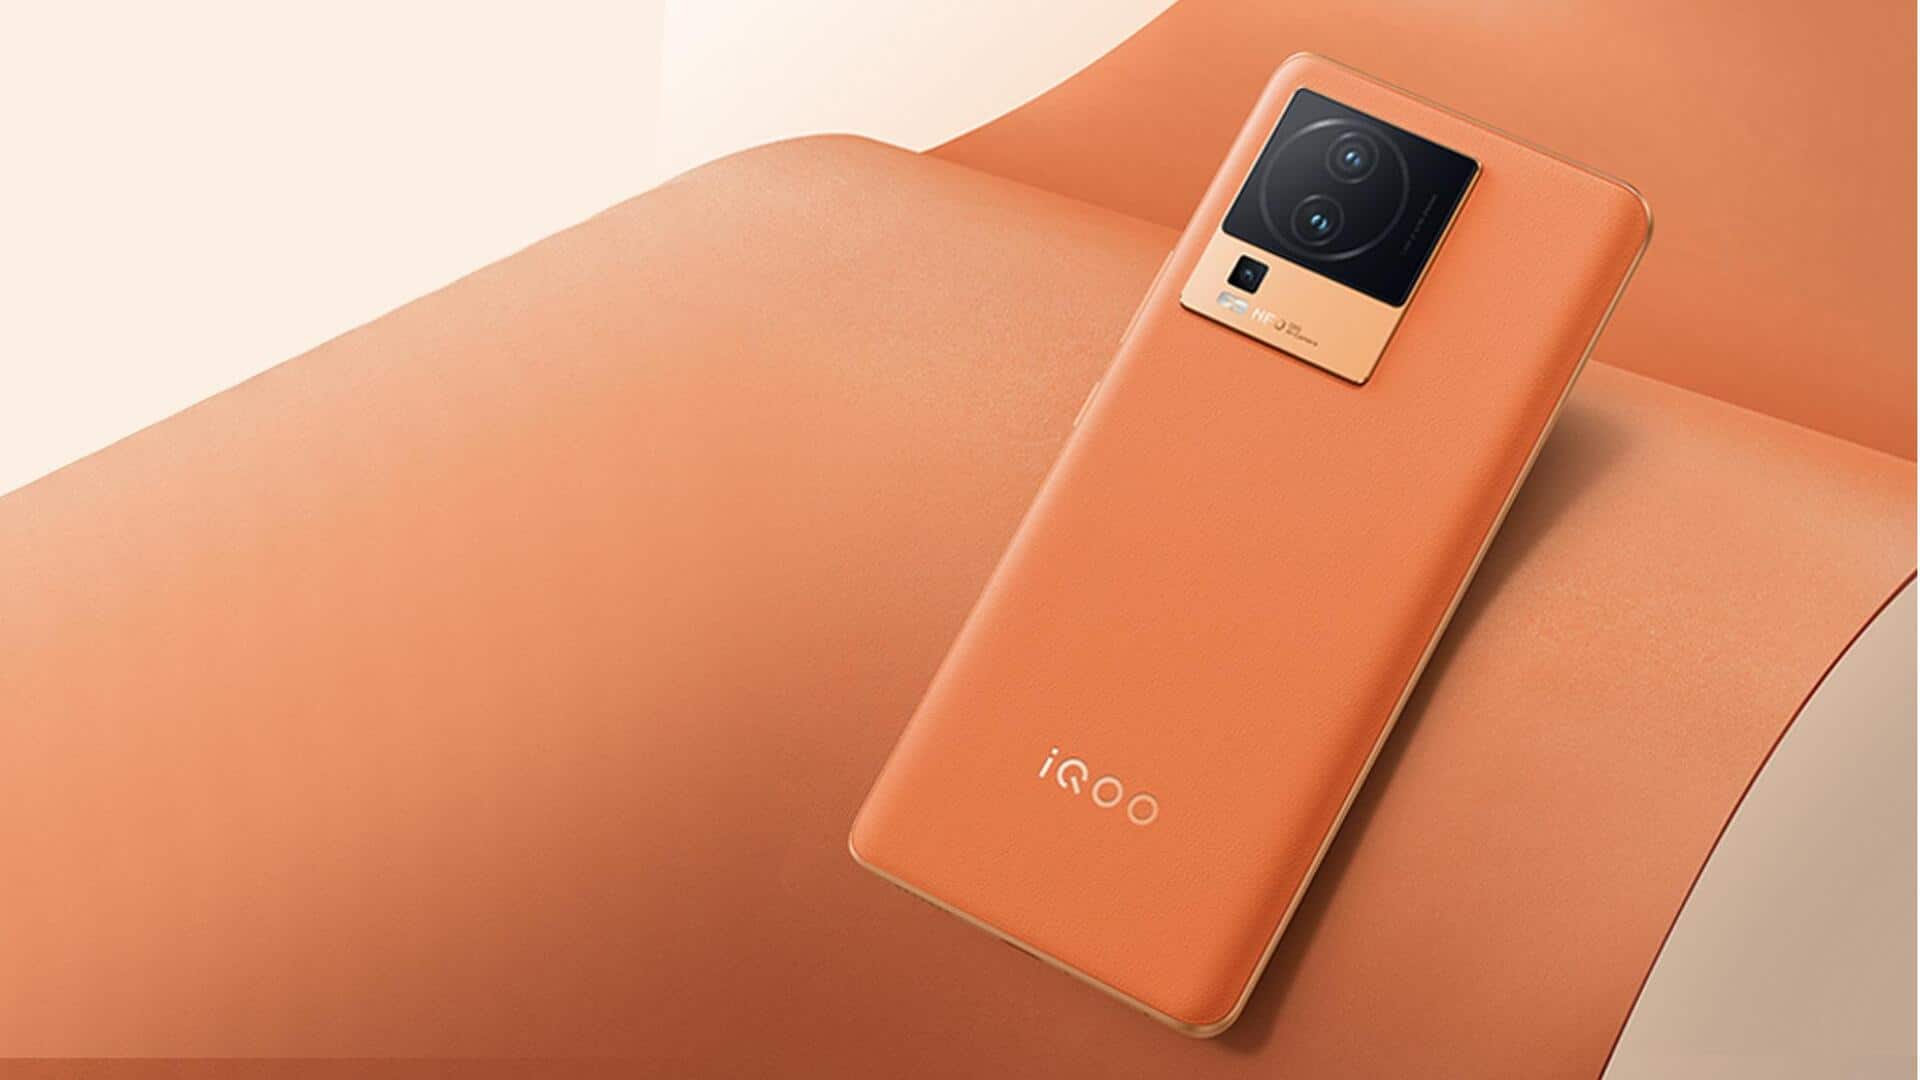 iQOO launches Nothing Phone (2) rival at Rs. 35,000